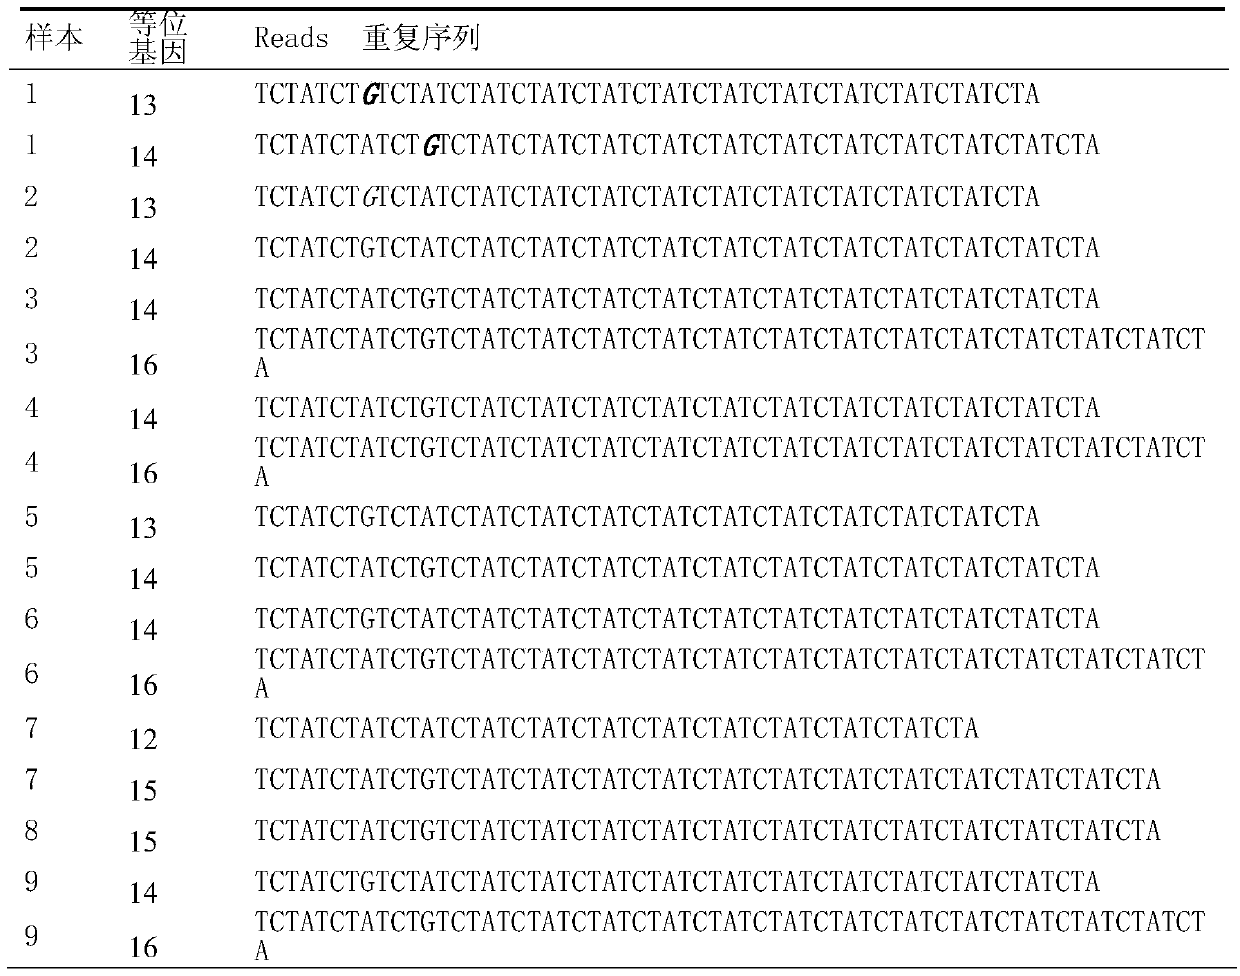 A next-generation sequencing-based method for STR typing of the locus D8S1179